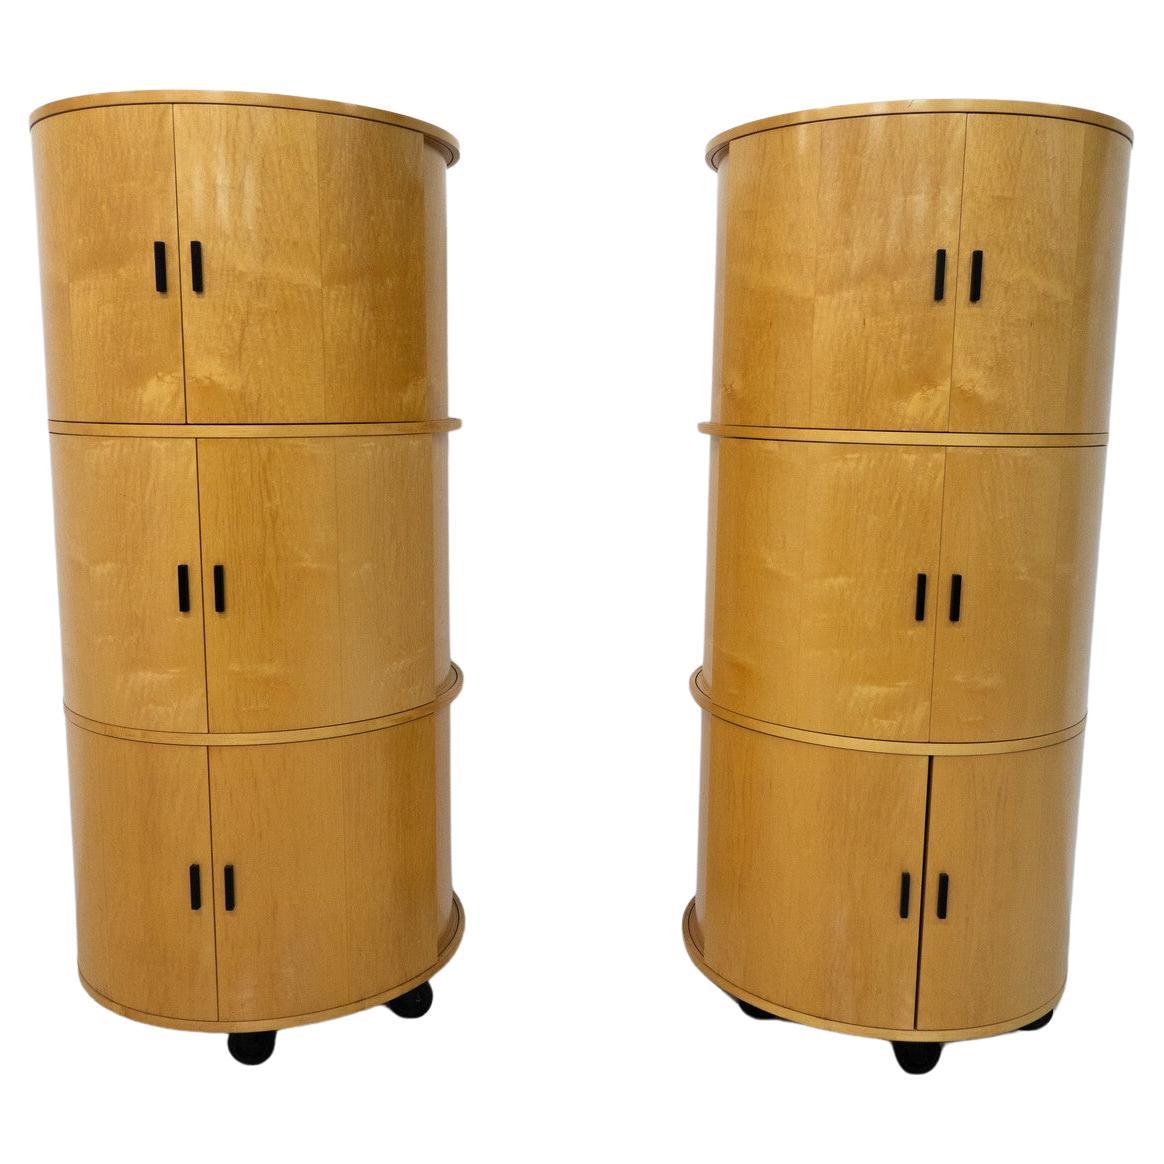 Mid-Century Modern Round Cabinets 'Big O' by Dirk Meylaerts, 1990s For Sale